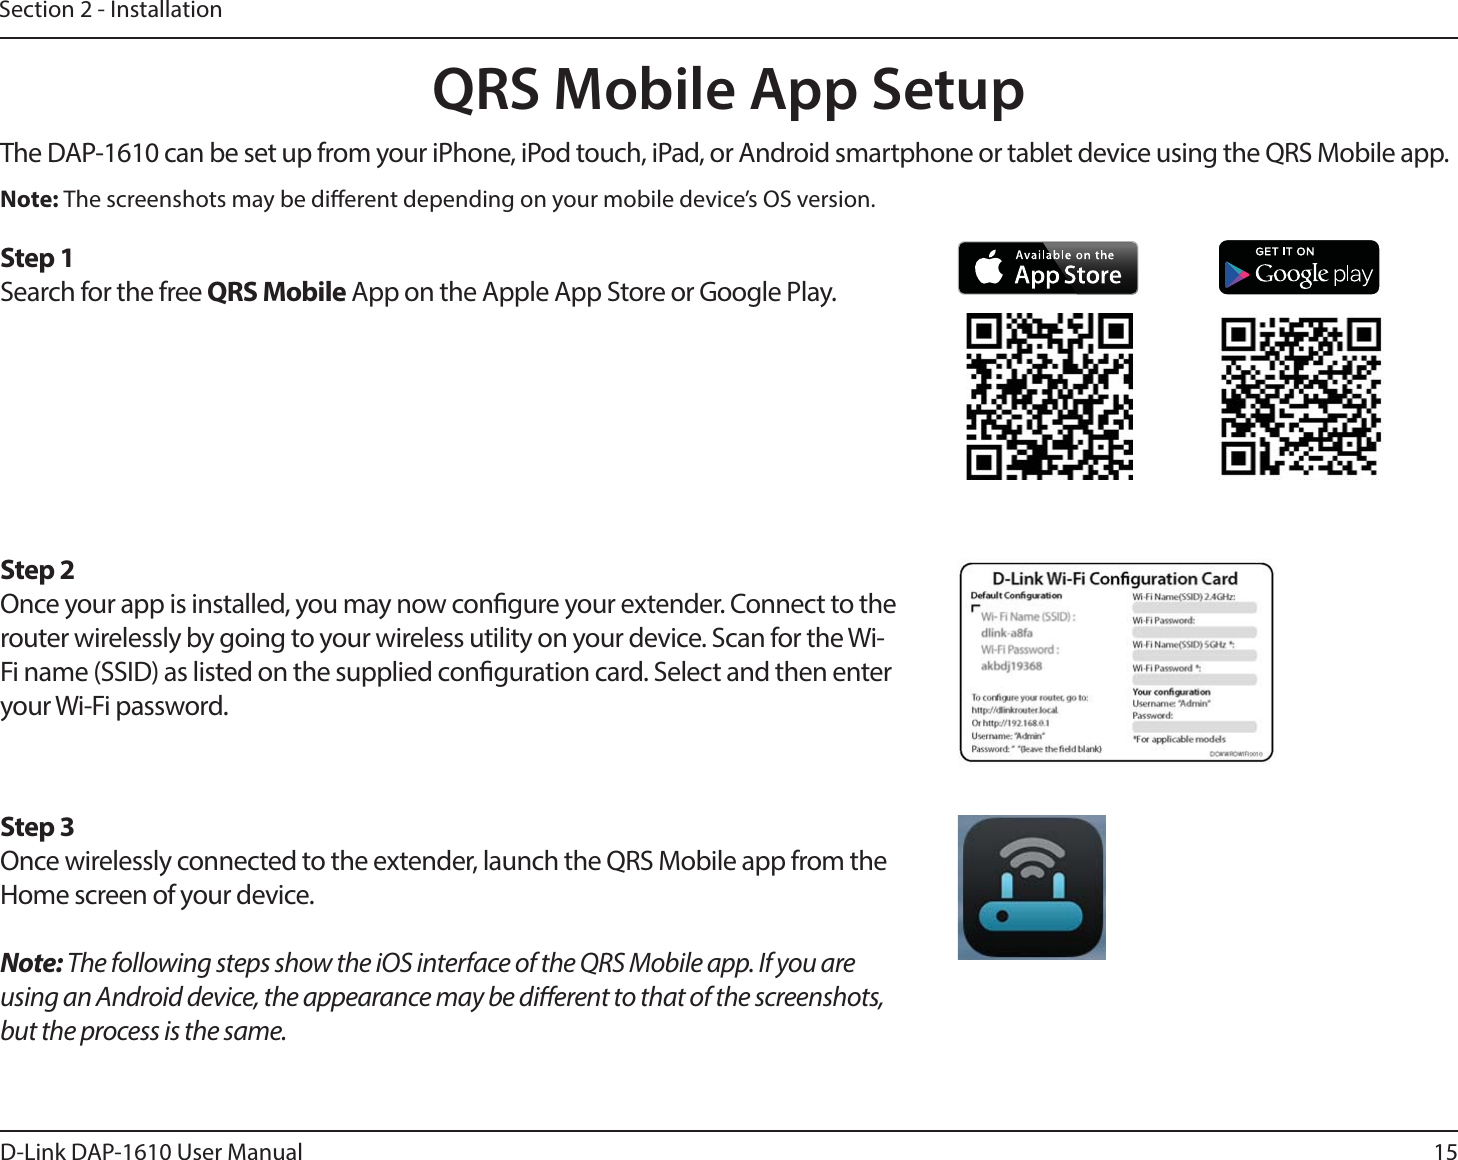 15D-Link DAP-1610 User ManualSection 2 - InstallationQRS Mobile App SetupThe DAP-1610 can be set up from your iPhone, iPod touch, iPad, or Android smartphone or tablet device using the QRS Mobile app.Step 2Once your app is installed, you may now congure your extender. Connect to the router wirelessly by going to your wireless utility on your device. Scan for the Wi-Fi name (SSID) as listed on the supplied conguration card. Select and then enter your Wi-Fi password.Step 3Once wirelessly connected to the extender, launch the QRS Mobile app from the Home screen of your device.Note: The following steps show the iOS interface of the QRS Mobile app. If you are using an Android device, the appearance may be dierent to that of the screenshots, but the process is the same.Step 1Search for the free QRS Mobile App on the Apple App Store or Google Play.Note: The screenshots may be dierent depending on your mobile device’s OS version.